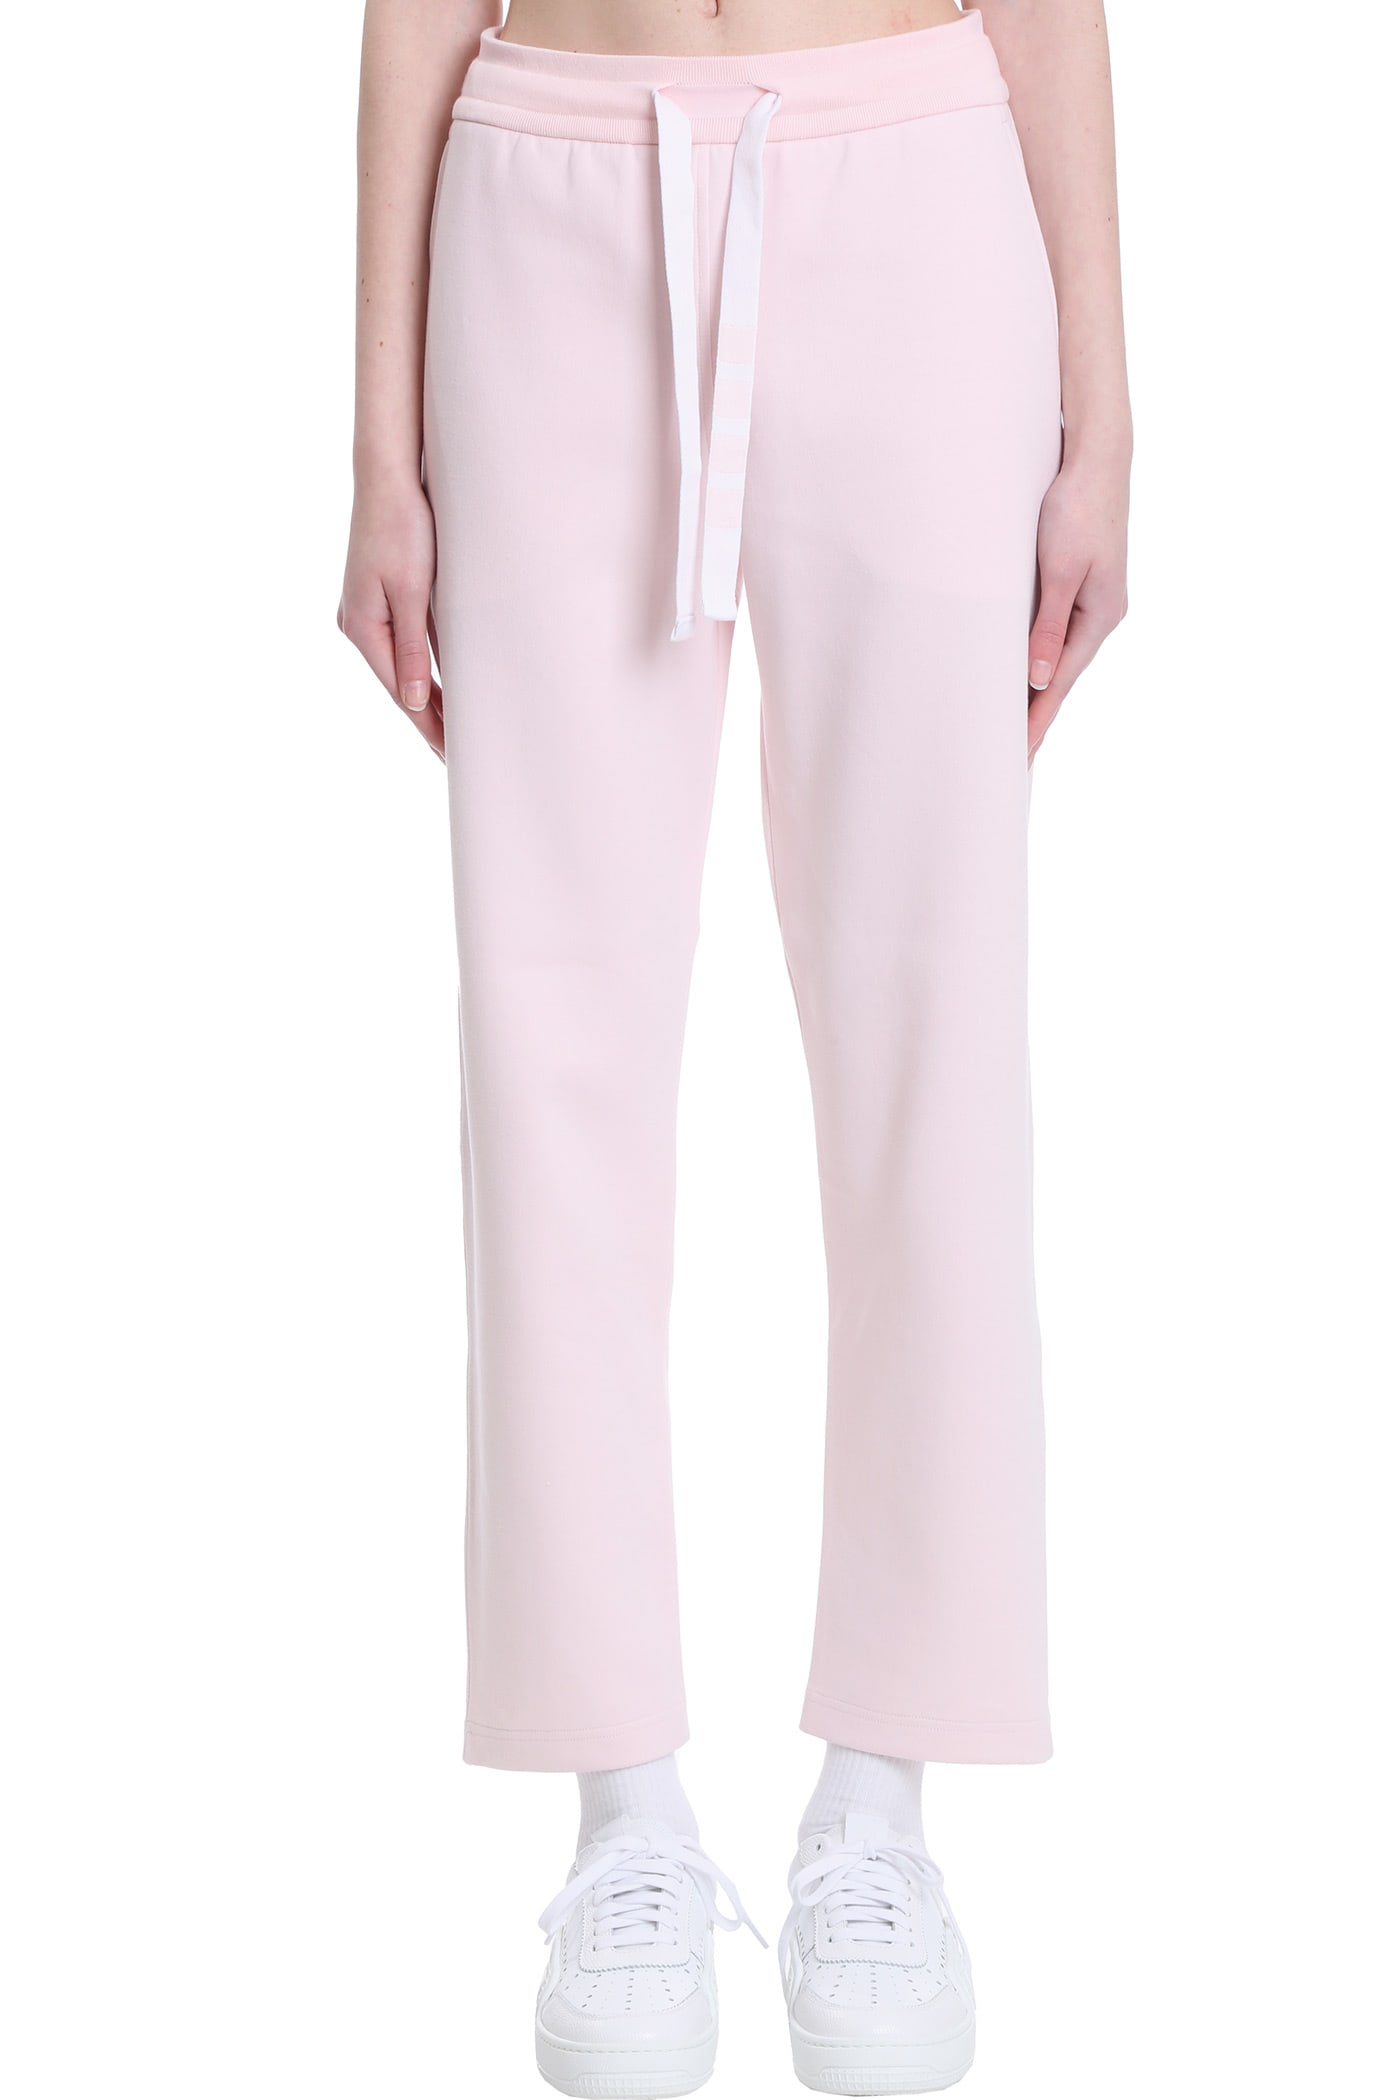 THOM BROWNE trousers IN ROSE-PINK COTTON,FJQ040A03034680